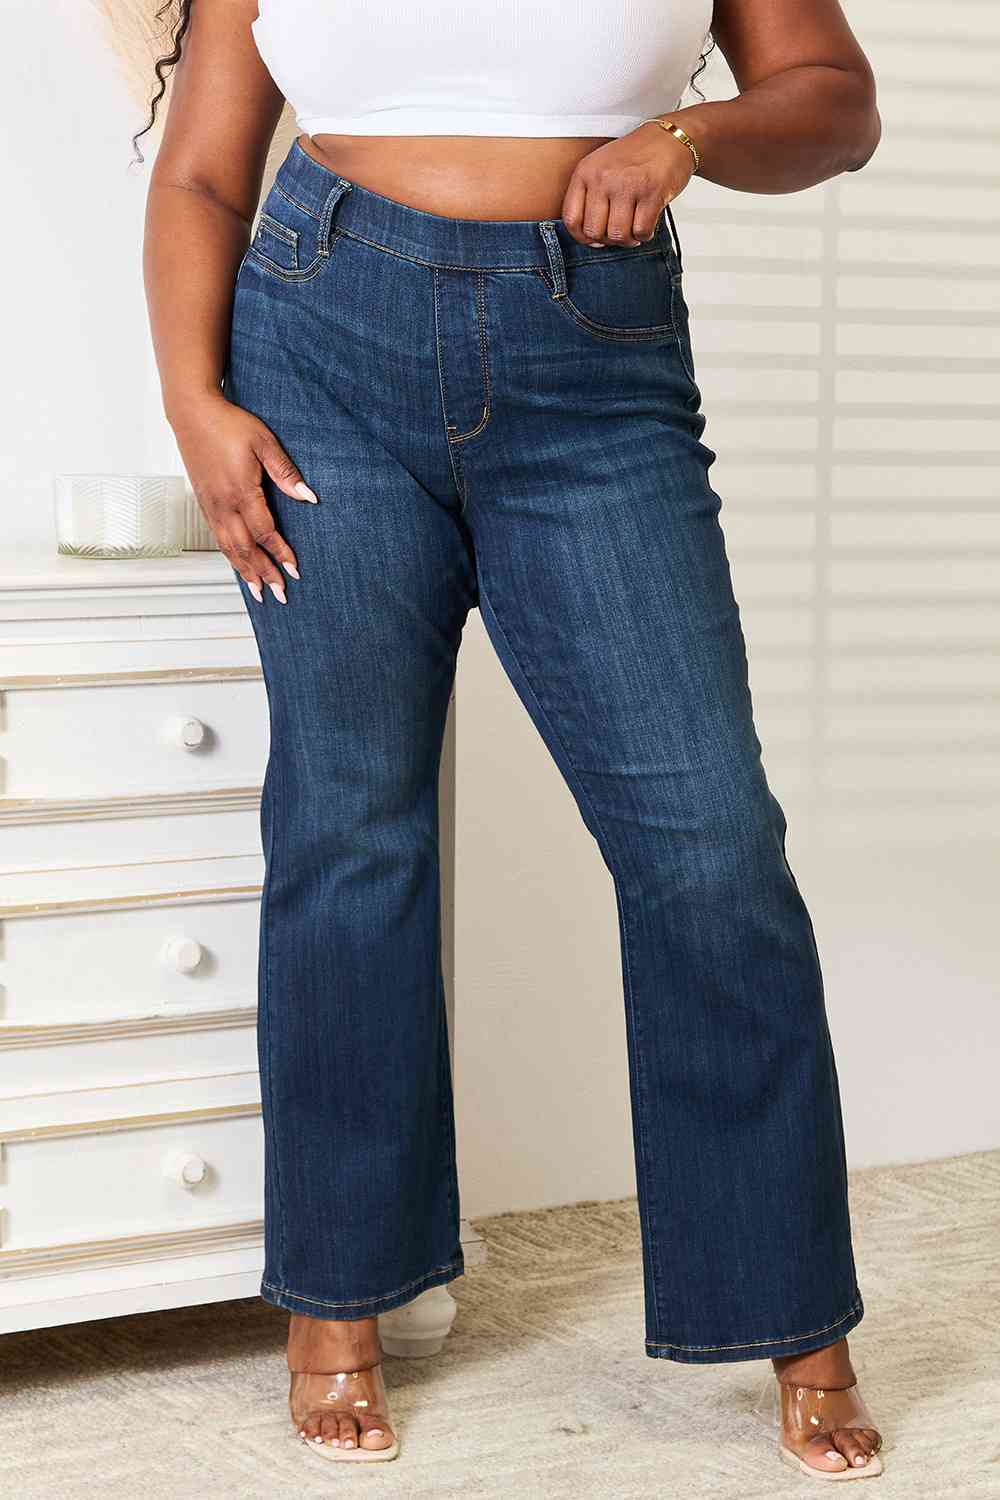 Judy Blue Elastic Waistband Bootcut Jeans Sizes: 0 to 24W